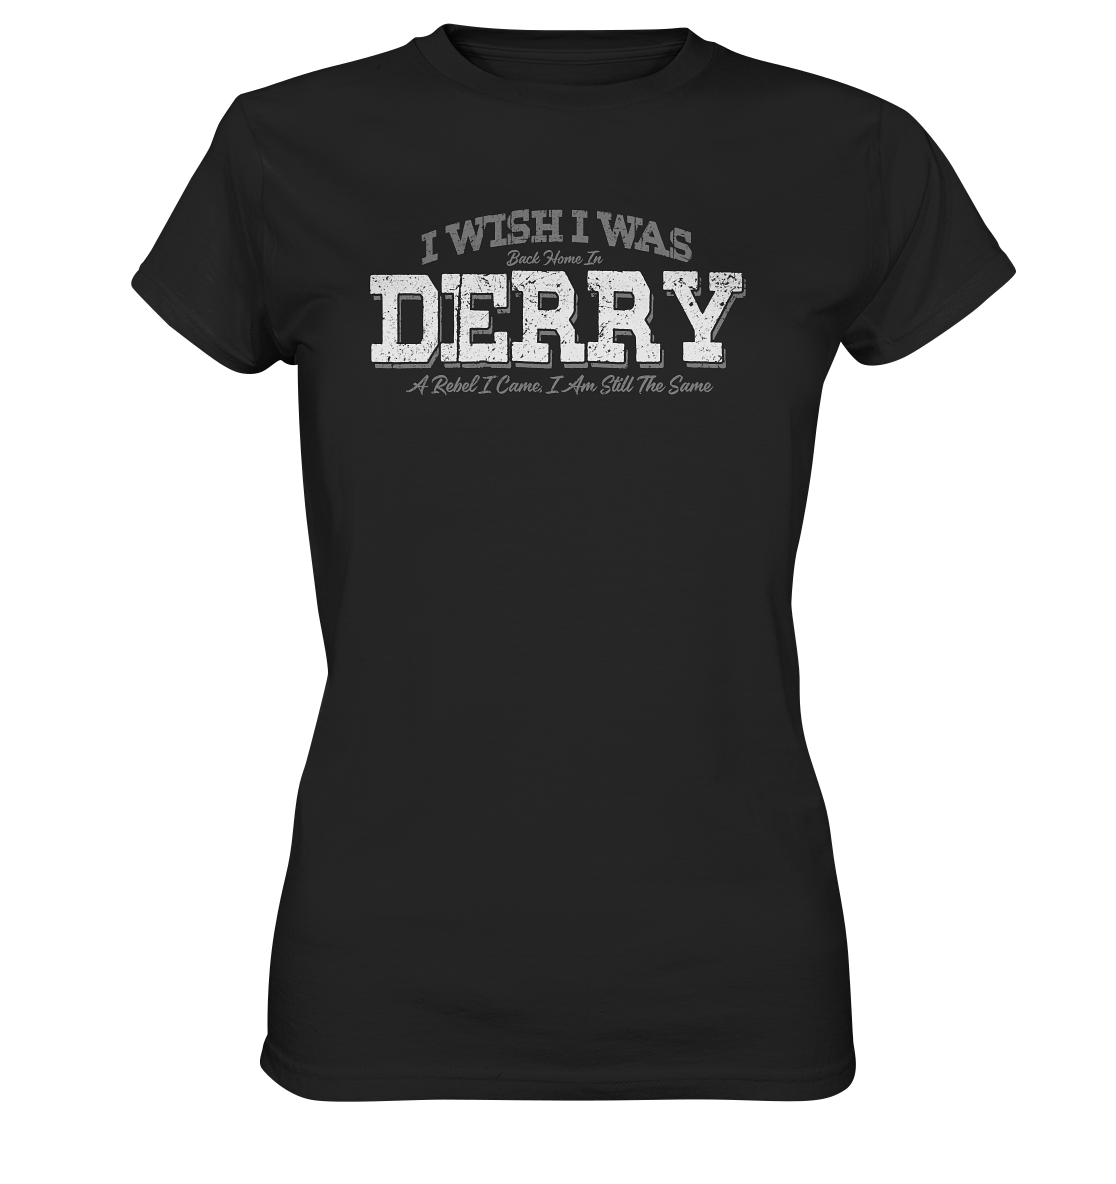 I Wish I Was Back Home In Derry - Ladies Premium Shirt